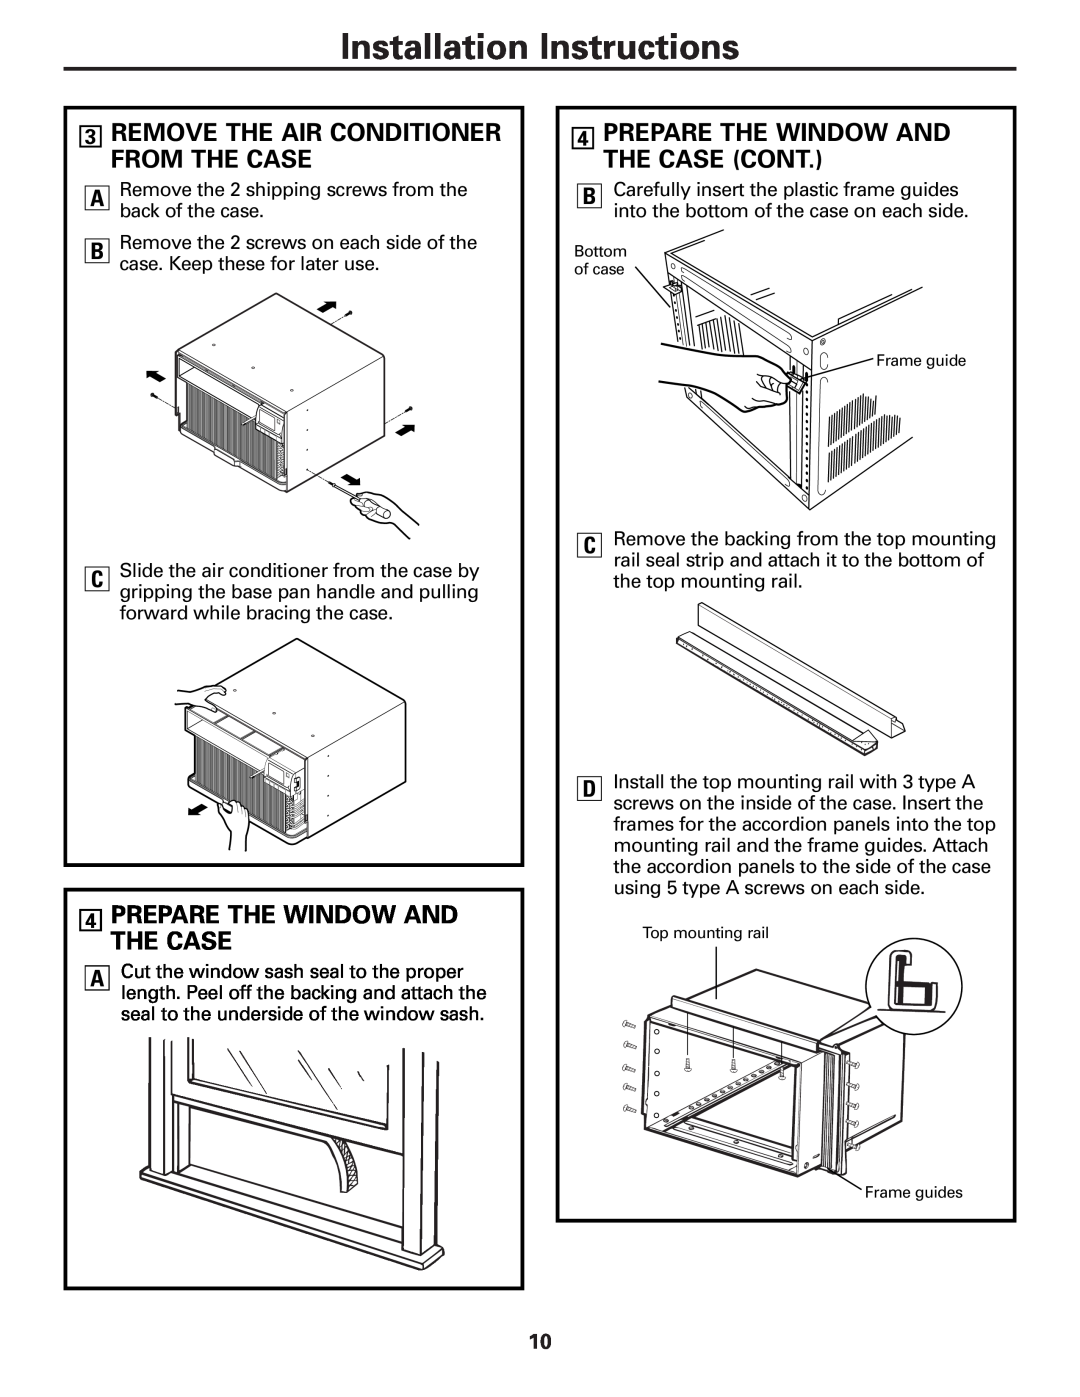 GE AGW18, AGH18 3REMOVE THE AIR CONDITIONER FROM THE CASE, 4PREPARE THE WINDOW AND THE CASE, Installation Instructions 